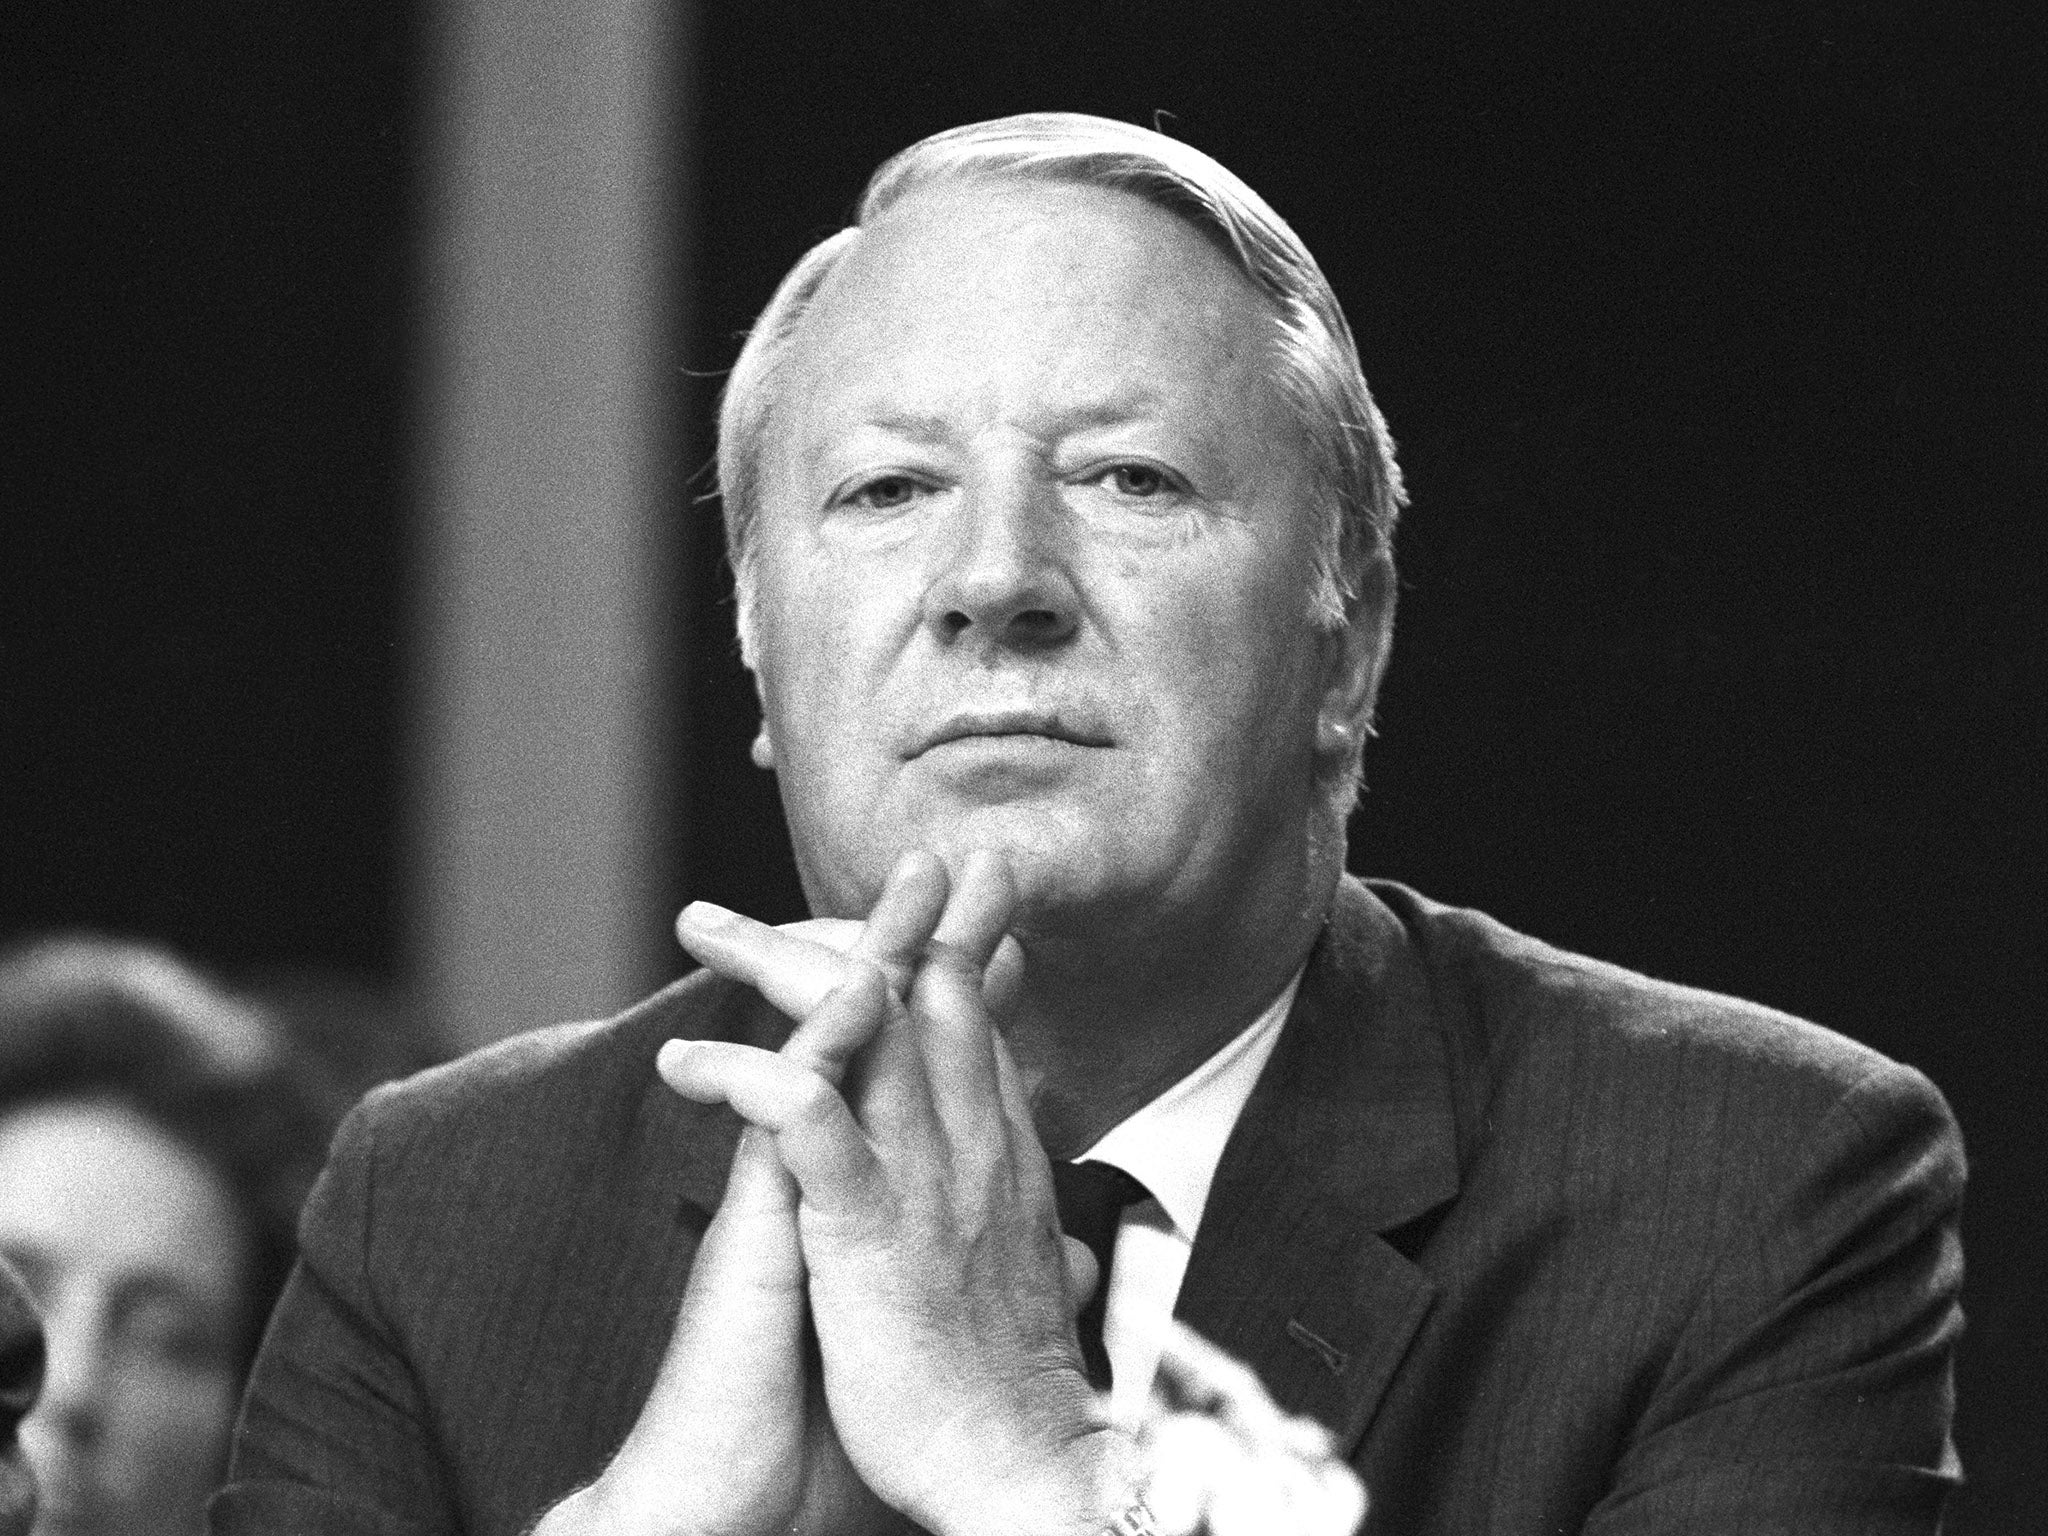 The legacy of former prime minister Ted Heath has been shattered beyond recognition